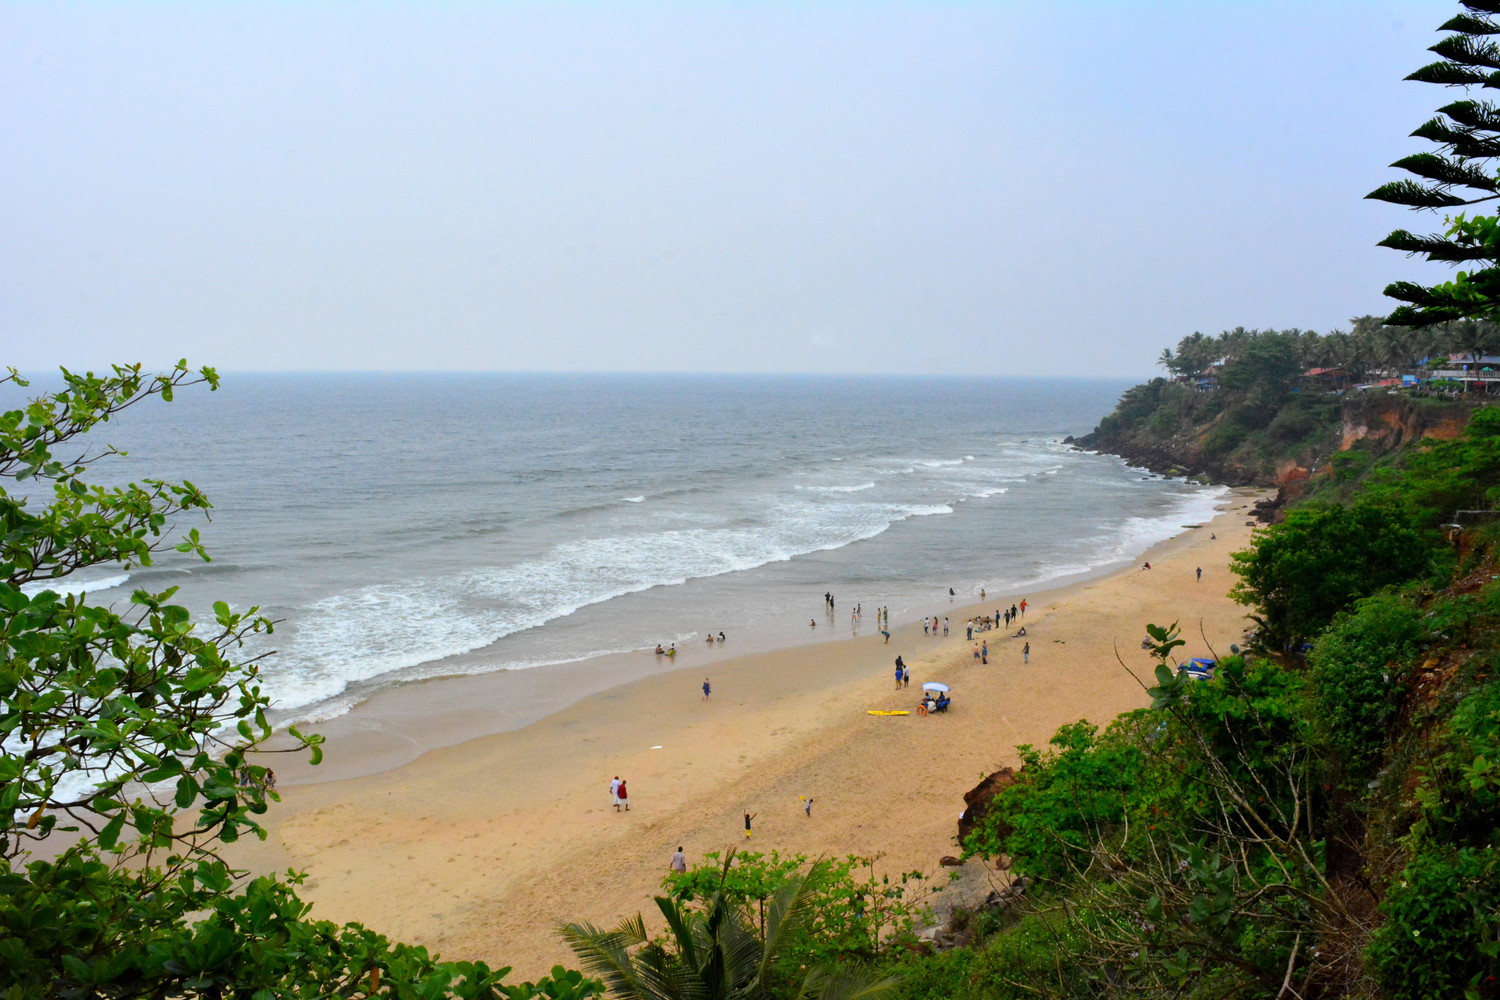 View of Varkala Beach from the North Cliff